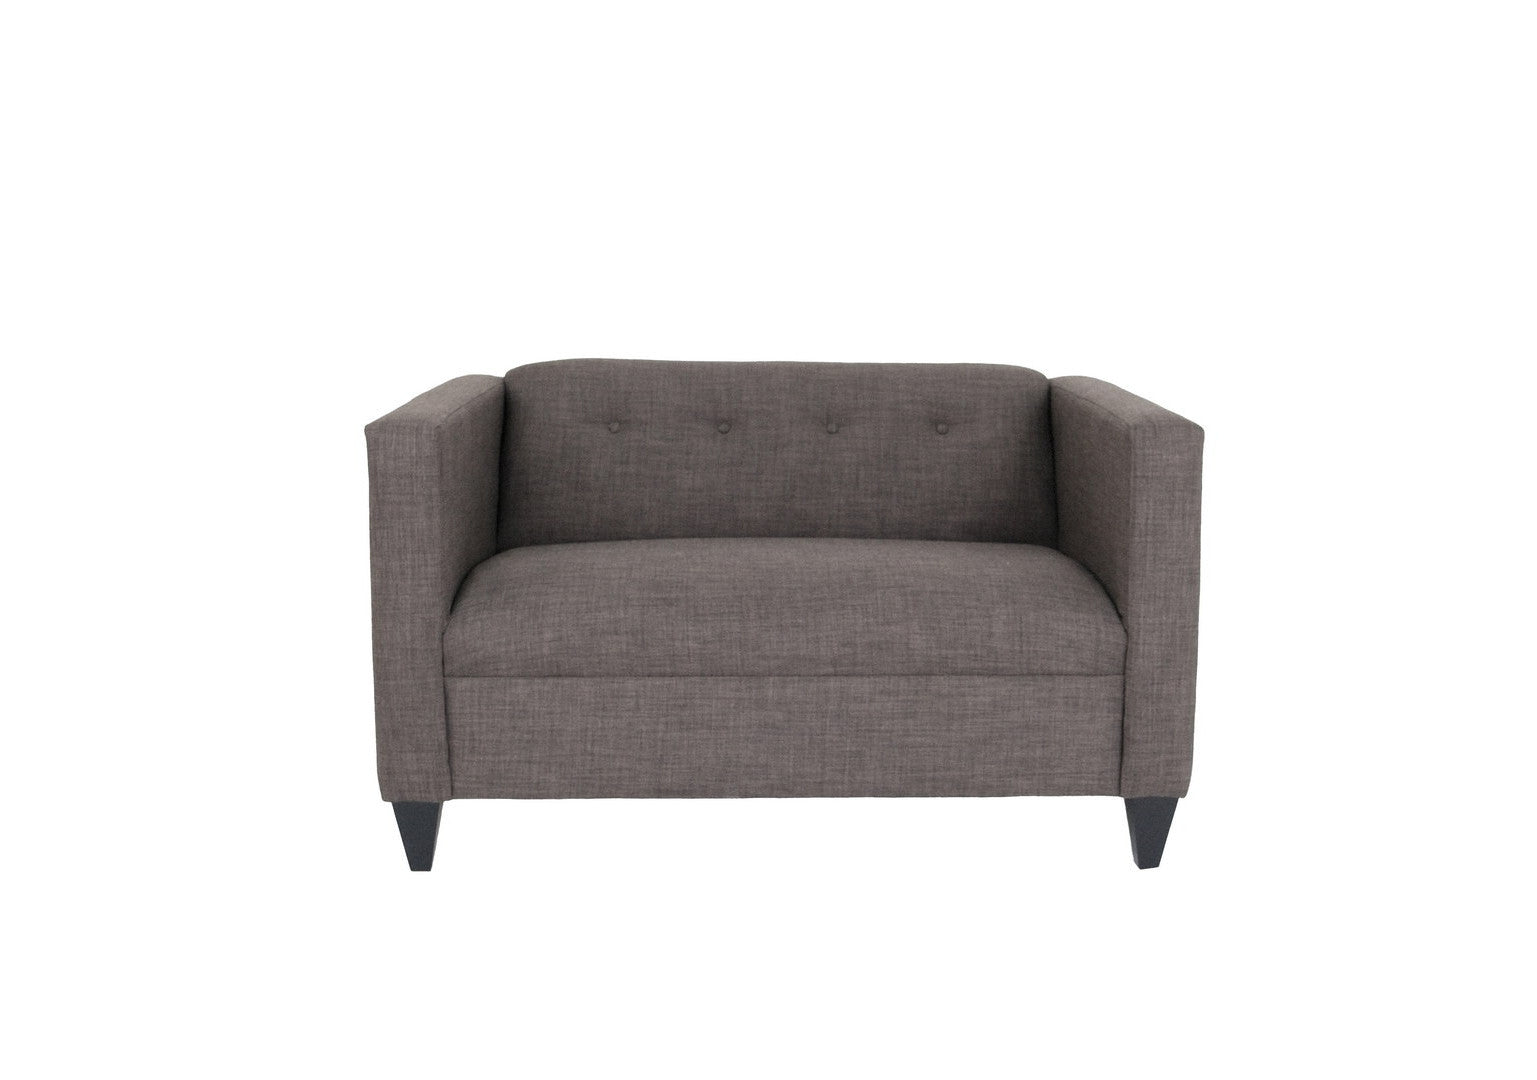 50" Charcoal And Dark Brown Polyester Blend Loveseat